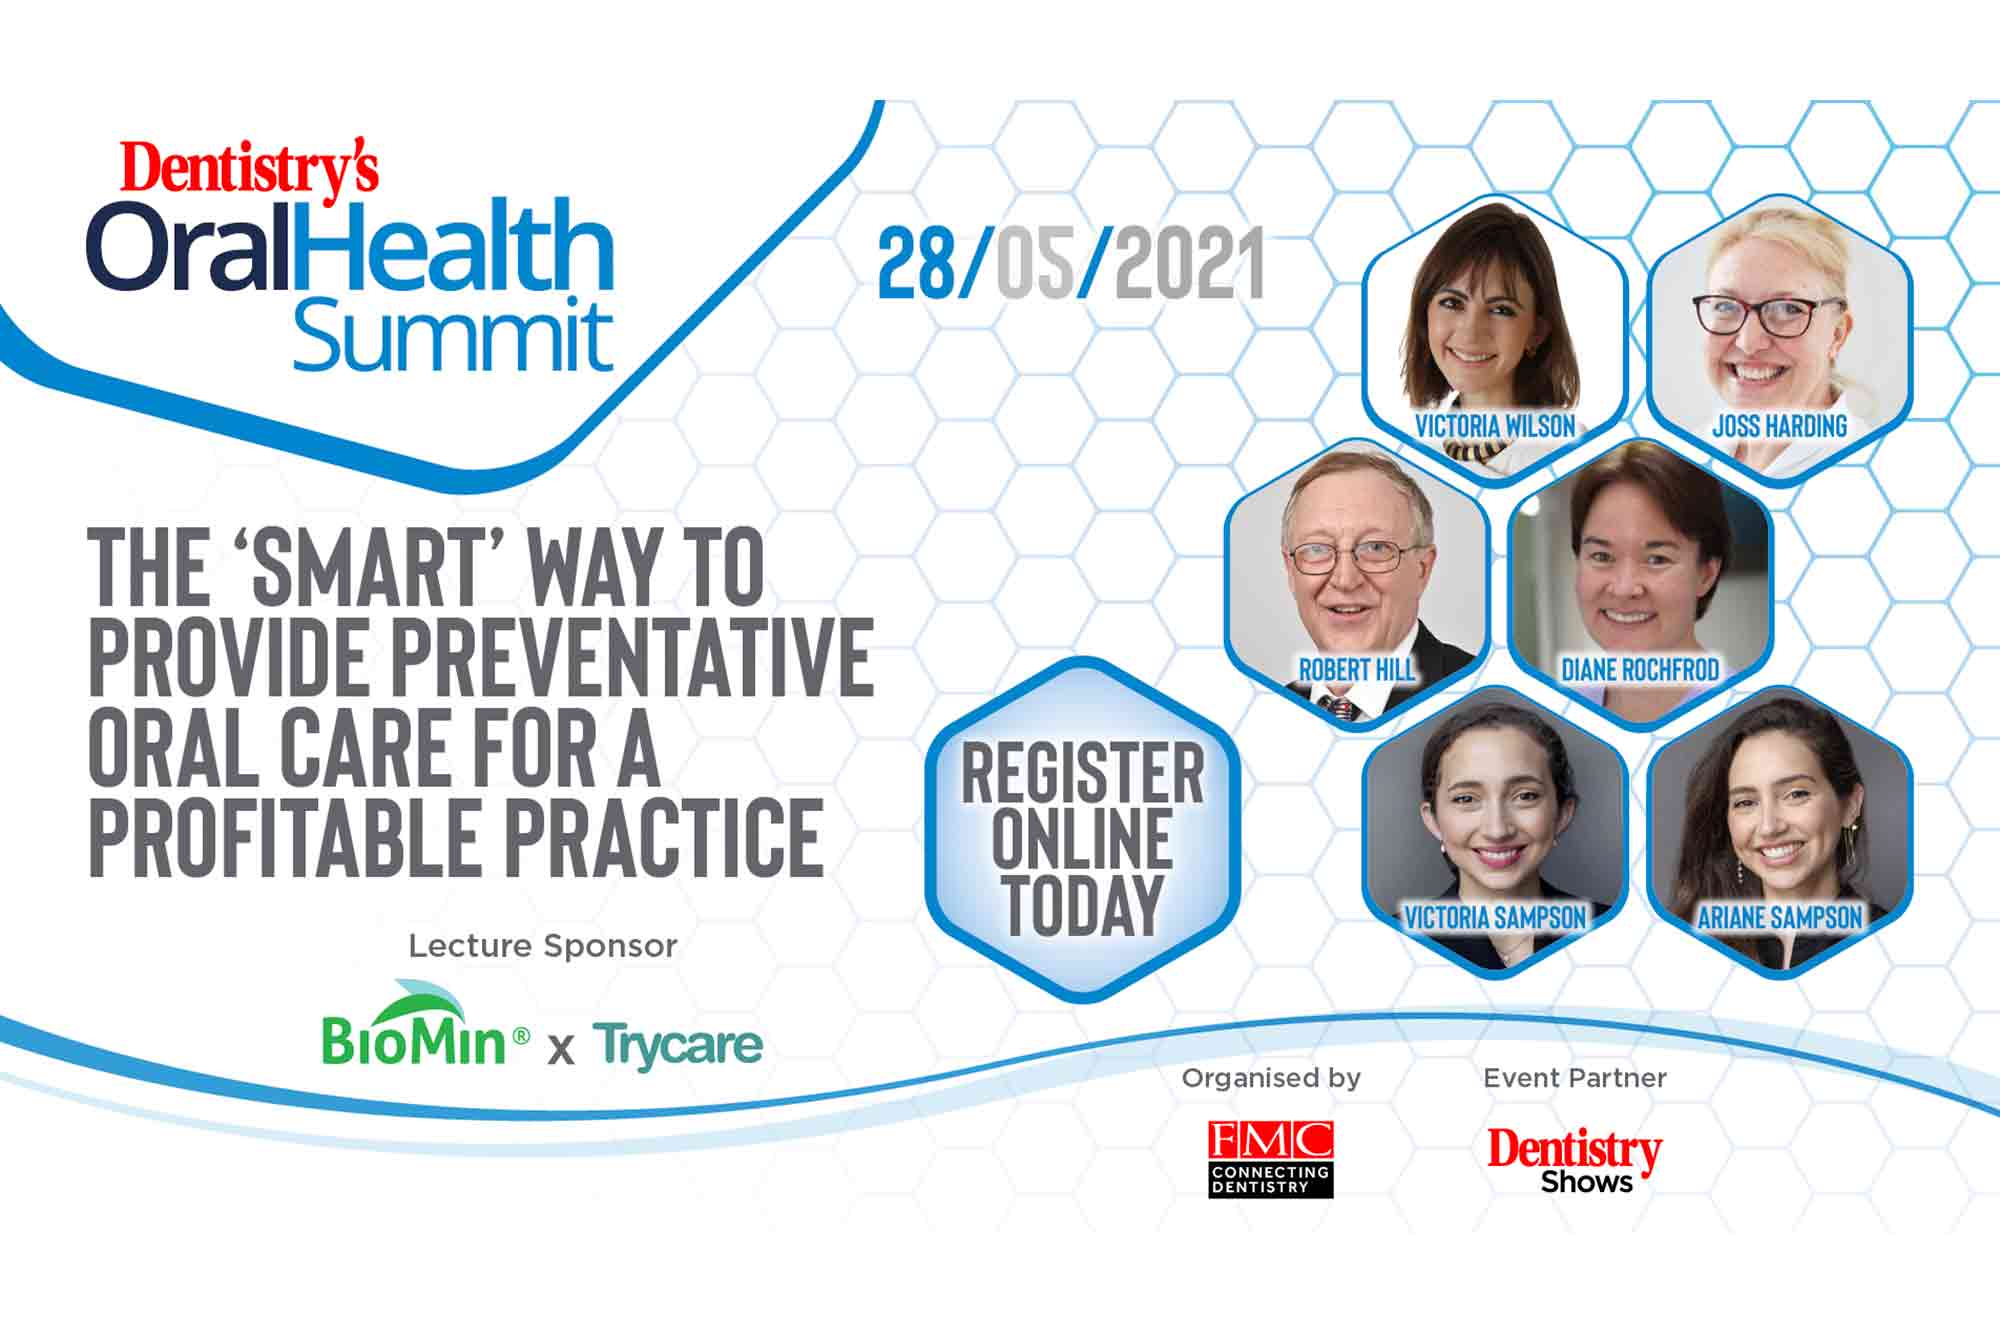 Sign up for the first ever Oral Health summit to listen to a talk on how to provide preventative care for a profitable practice